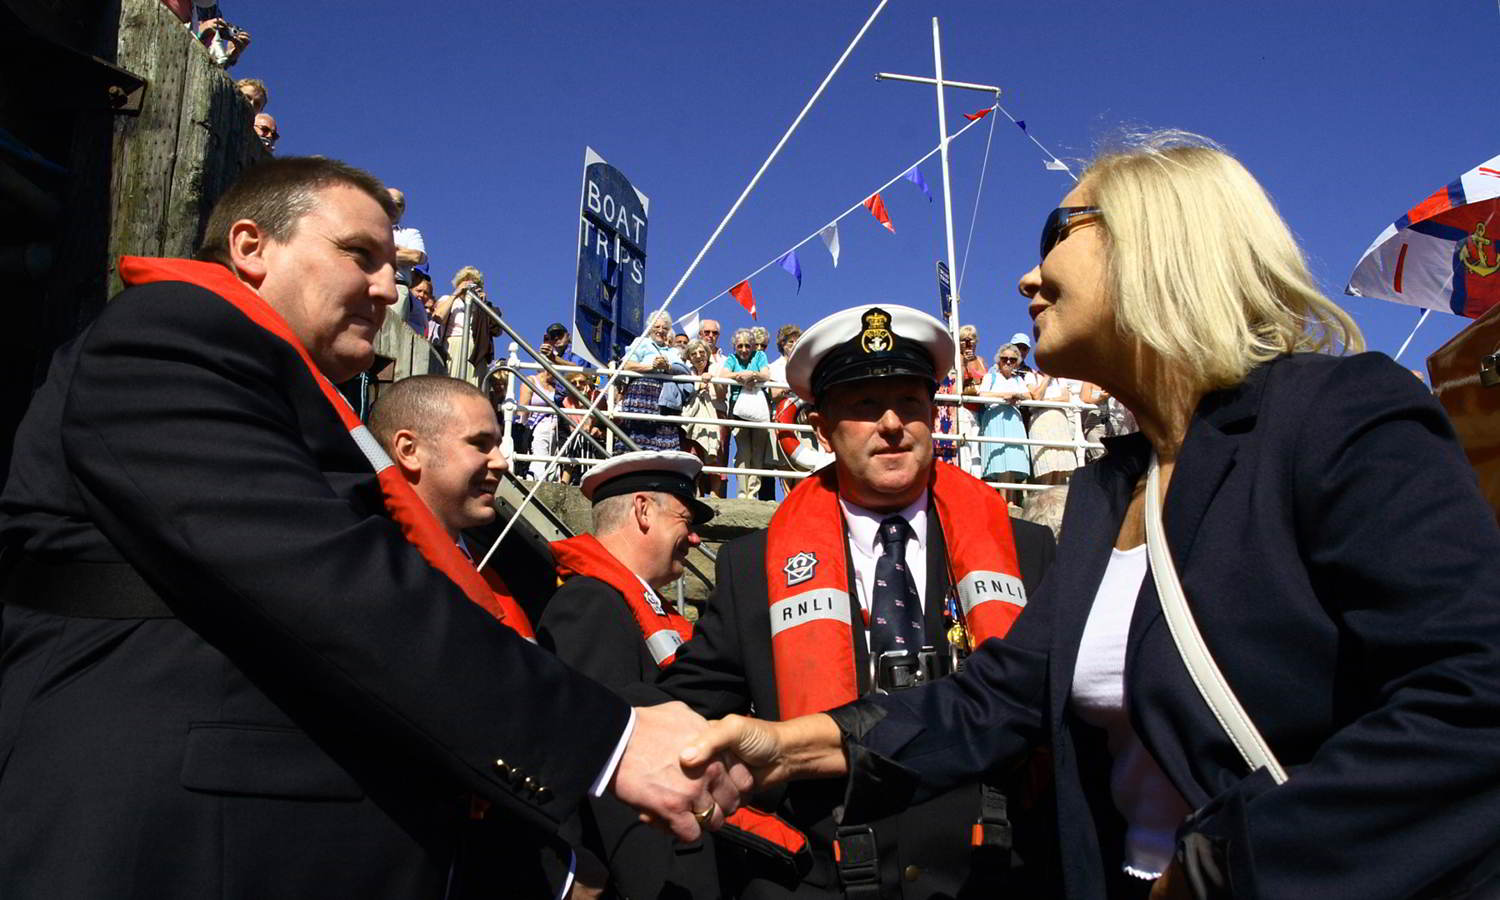 Meeting The Lifeboat Crew